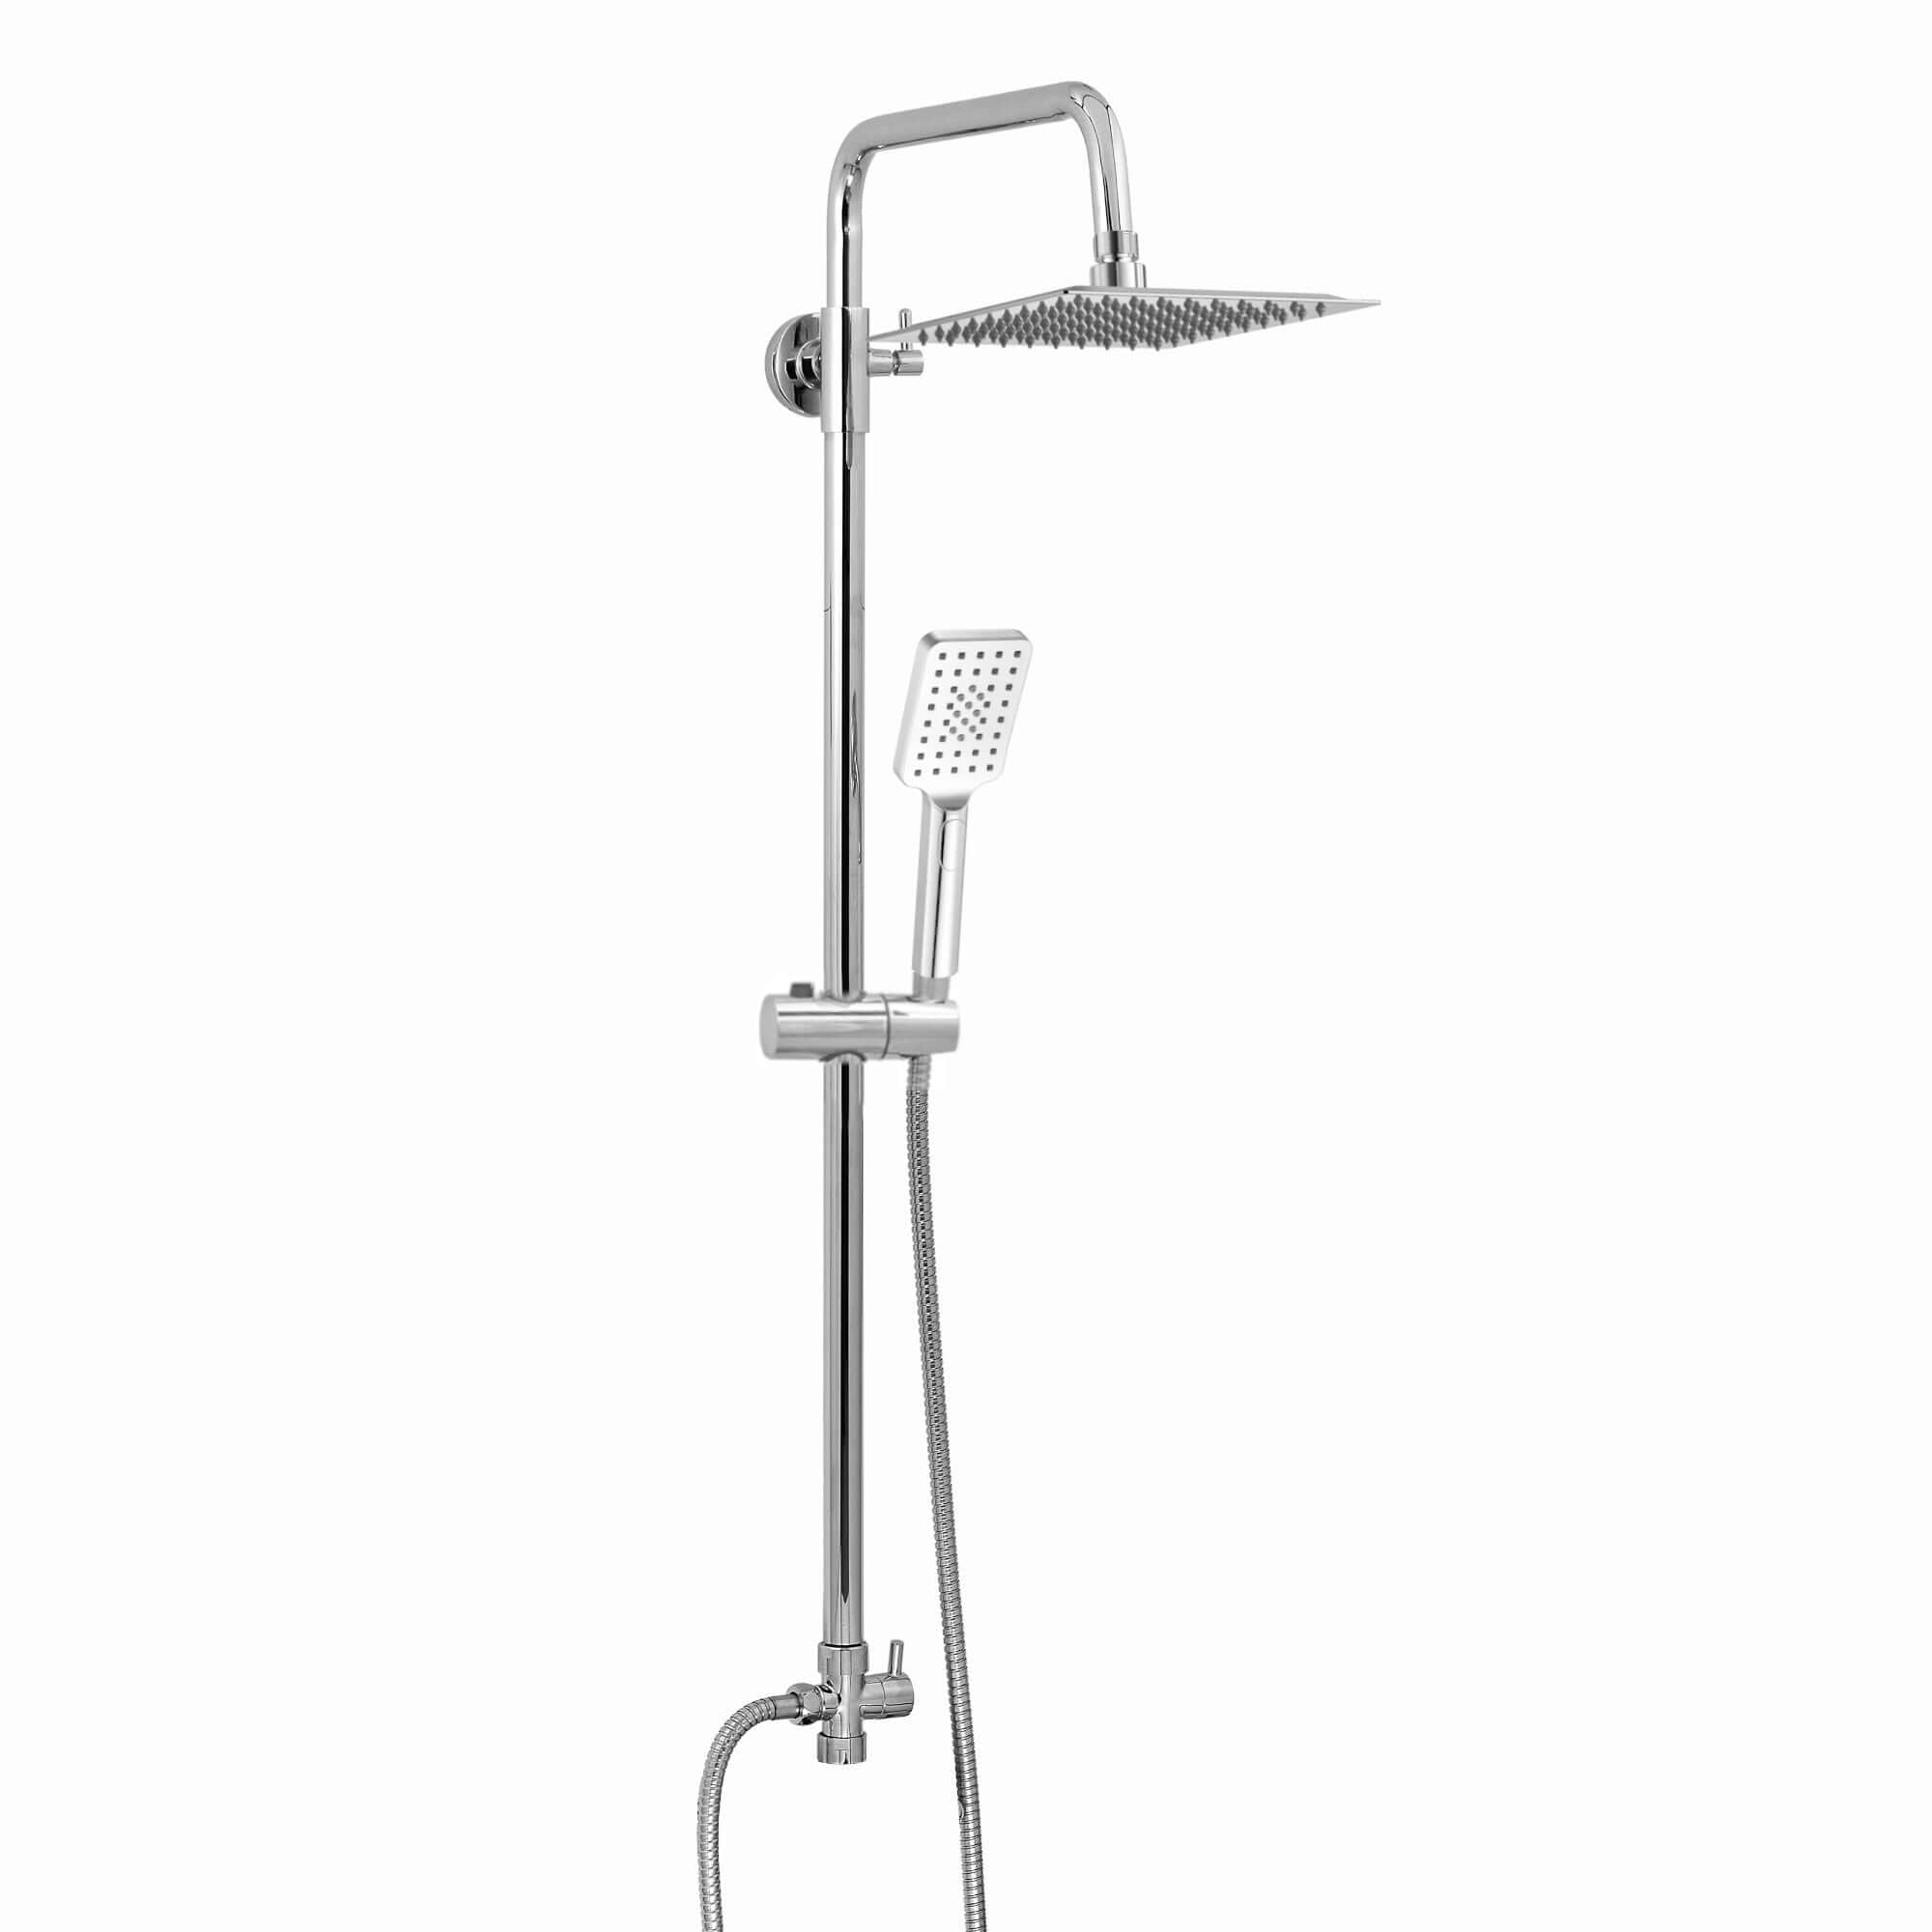 Carre dual shower riser kit adjustable height angled square easy clean head 200mm, handshower - chrome